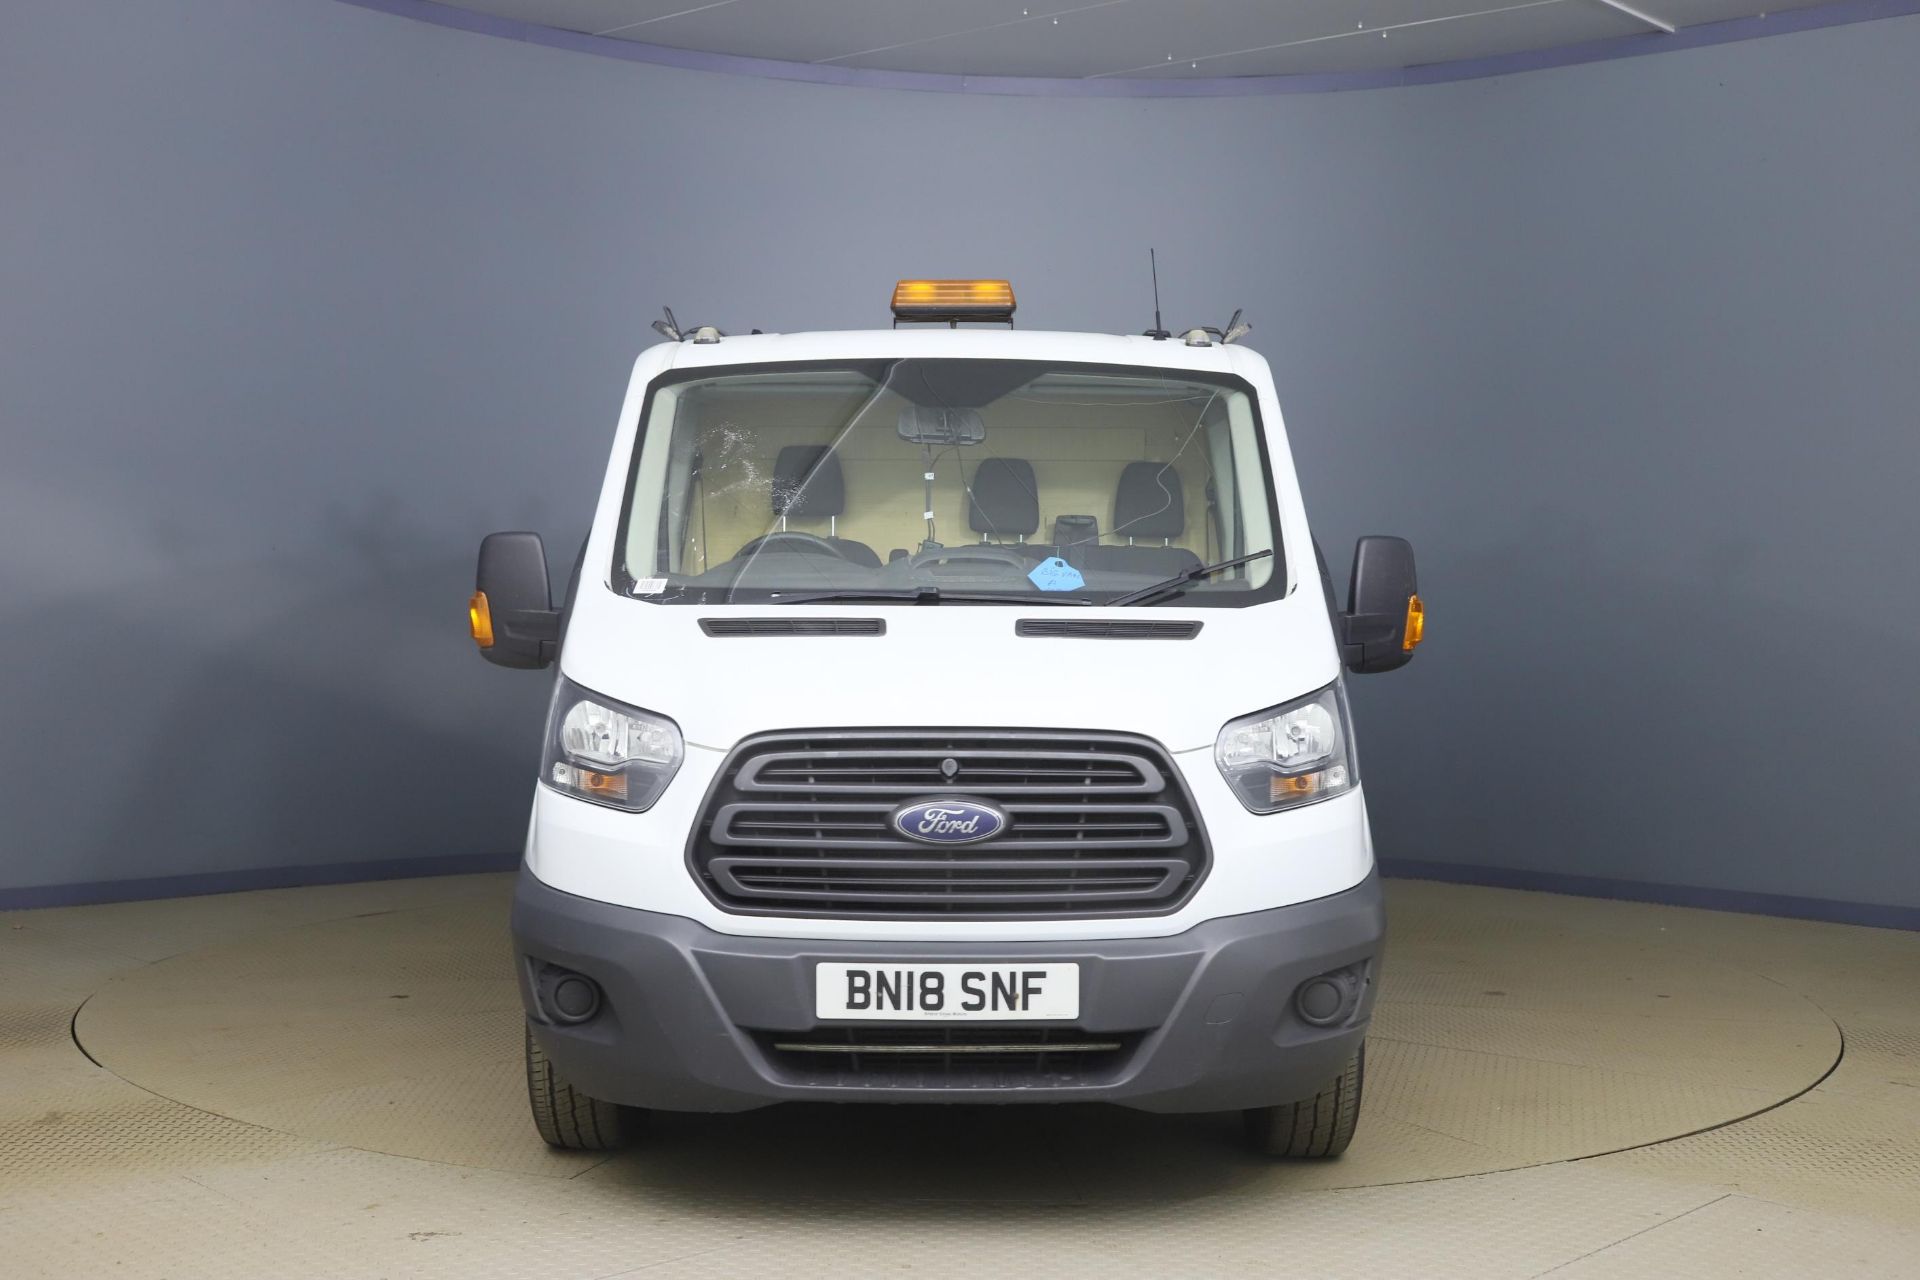 Ford Transit 2.0 TDCI 130 Double Cab Tipper 2018 '18 Reg' Euro 6 - ULEZ Compliant - Image 2 of 12